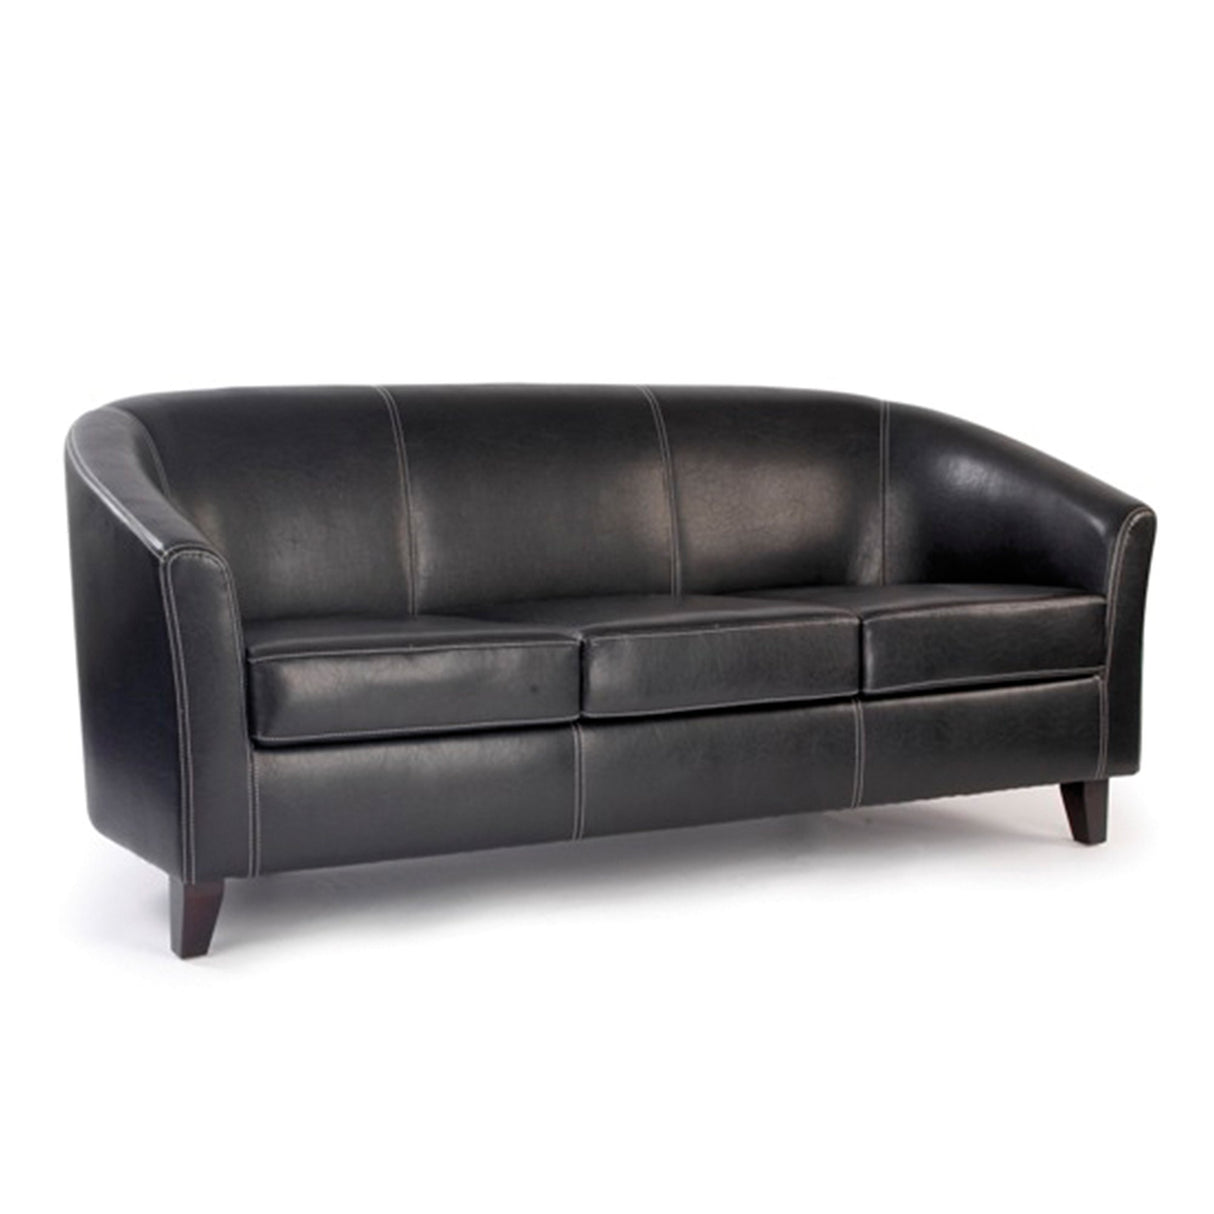 Nautilus Designs Metro  High Back Tub Style Three Seater Sofa Upholstered in a durable Leather Effect Finish - Brown